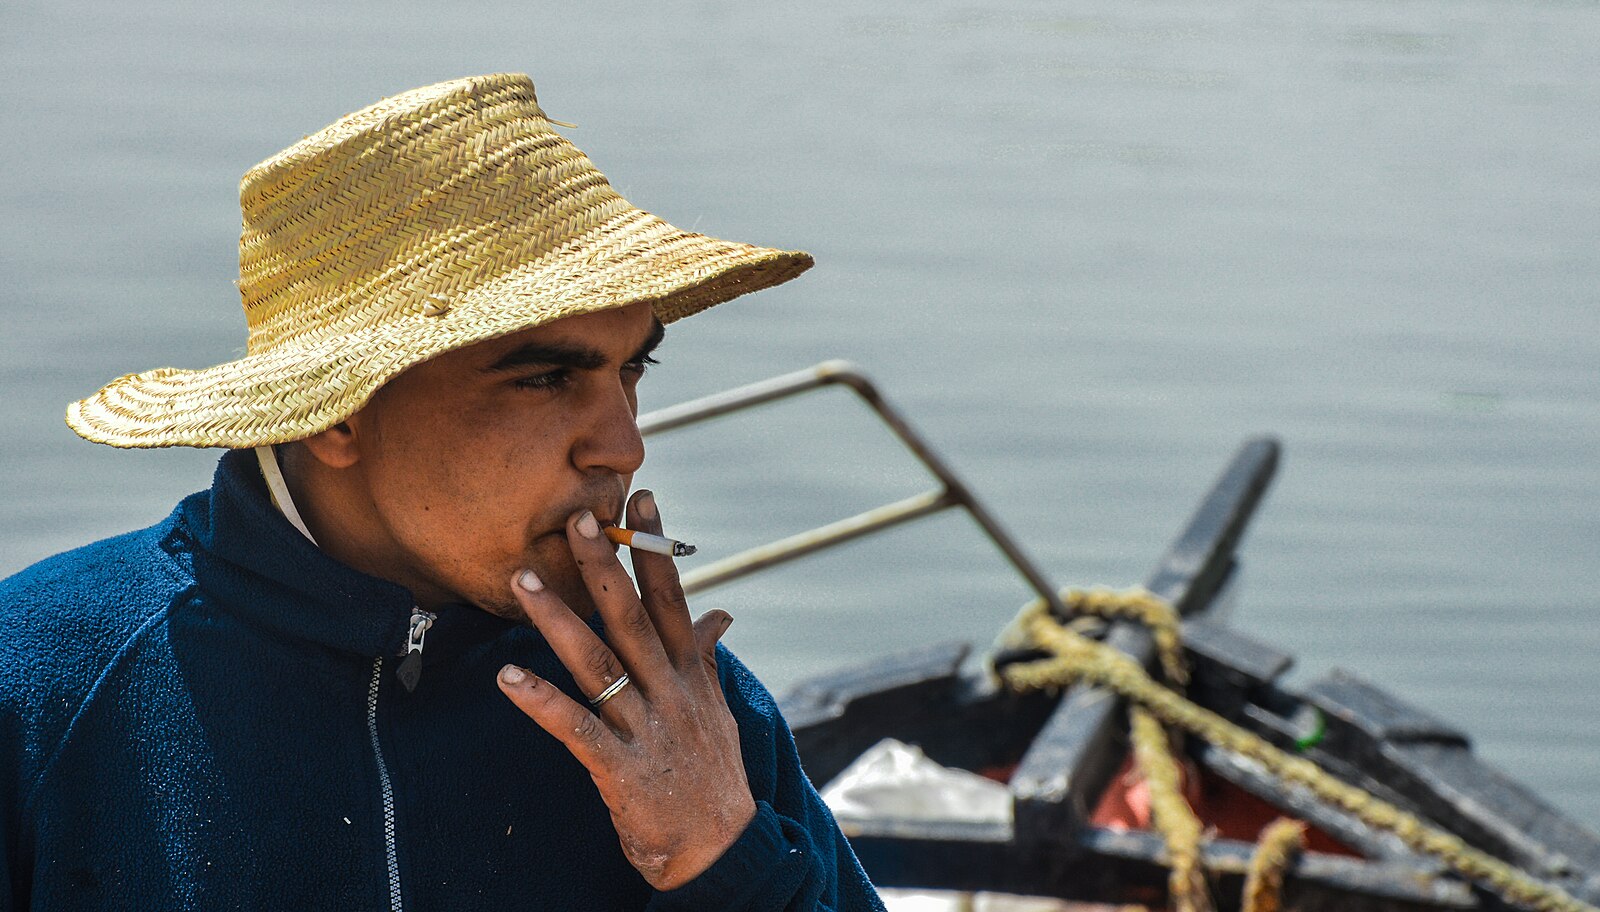 A Tunisian fisherman wearing a strawhat smoking while his boat is being refueled in Bizerte, Tunisia in 2016.